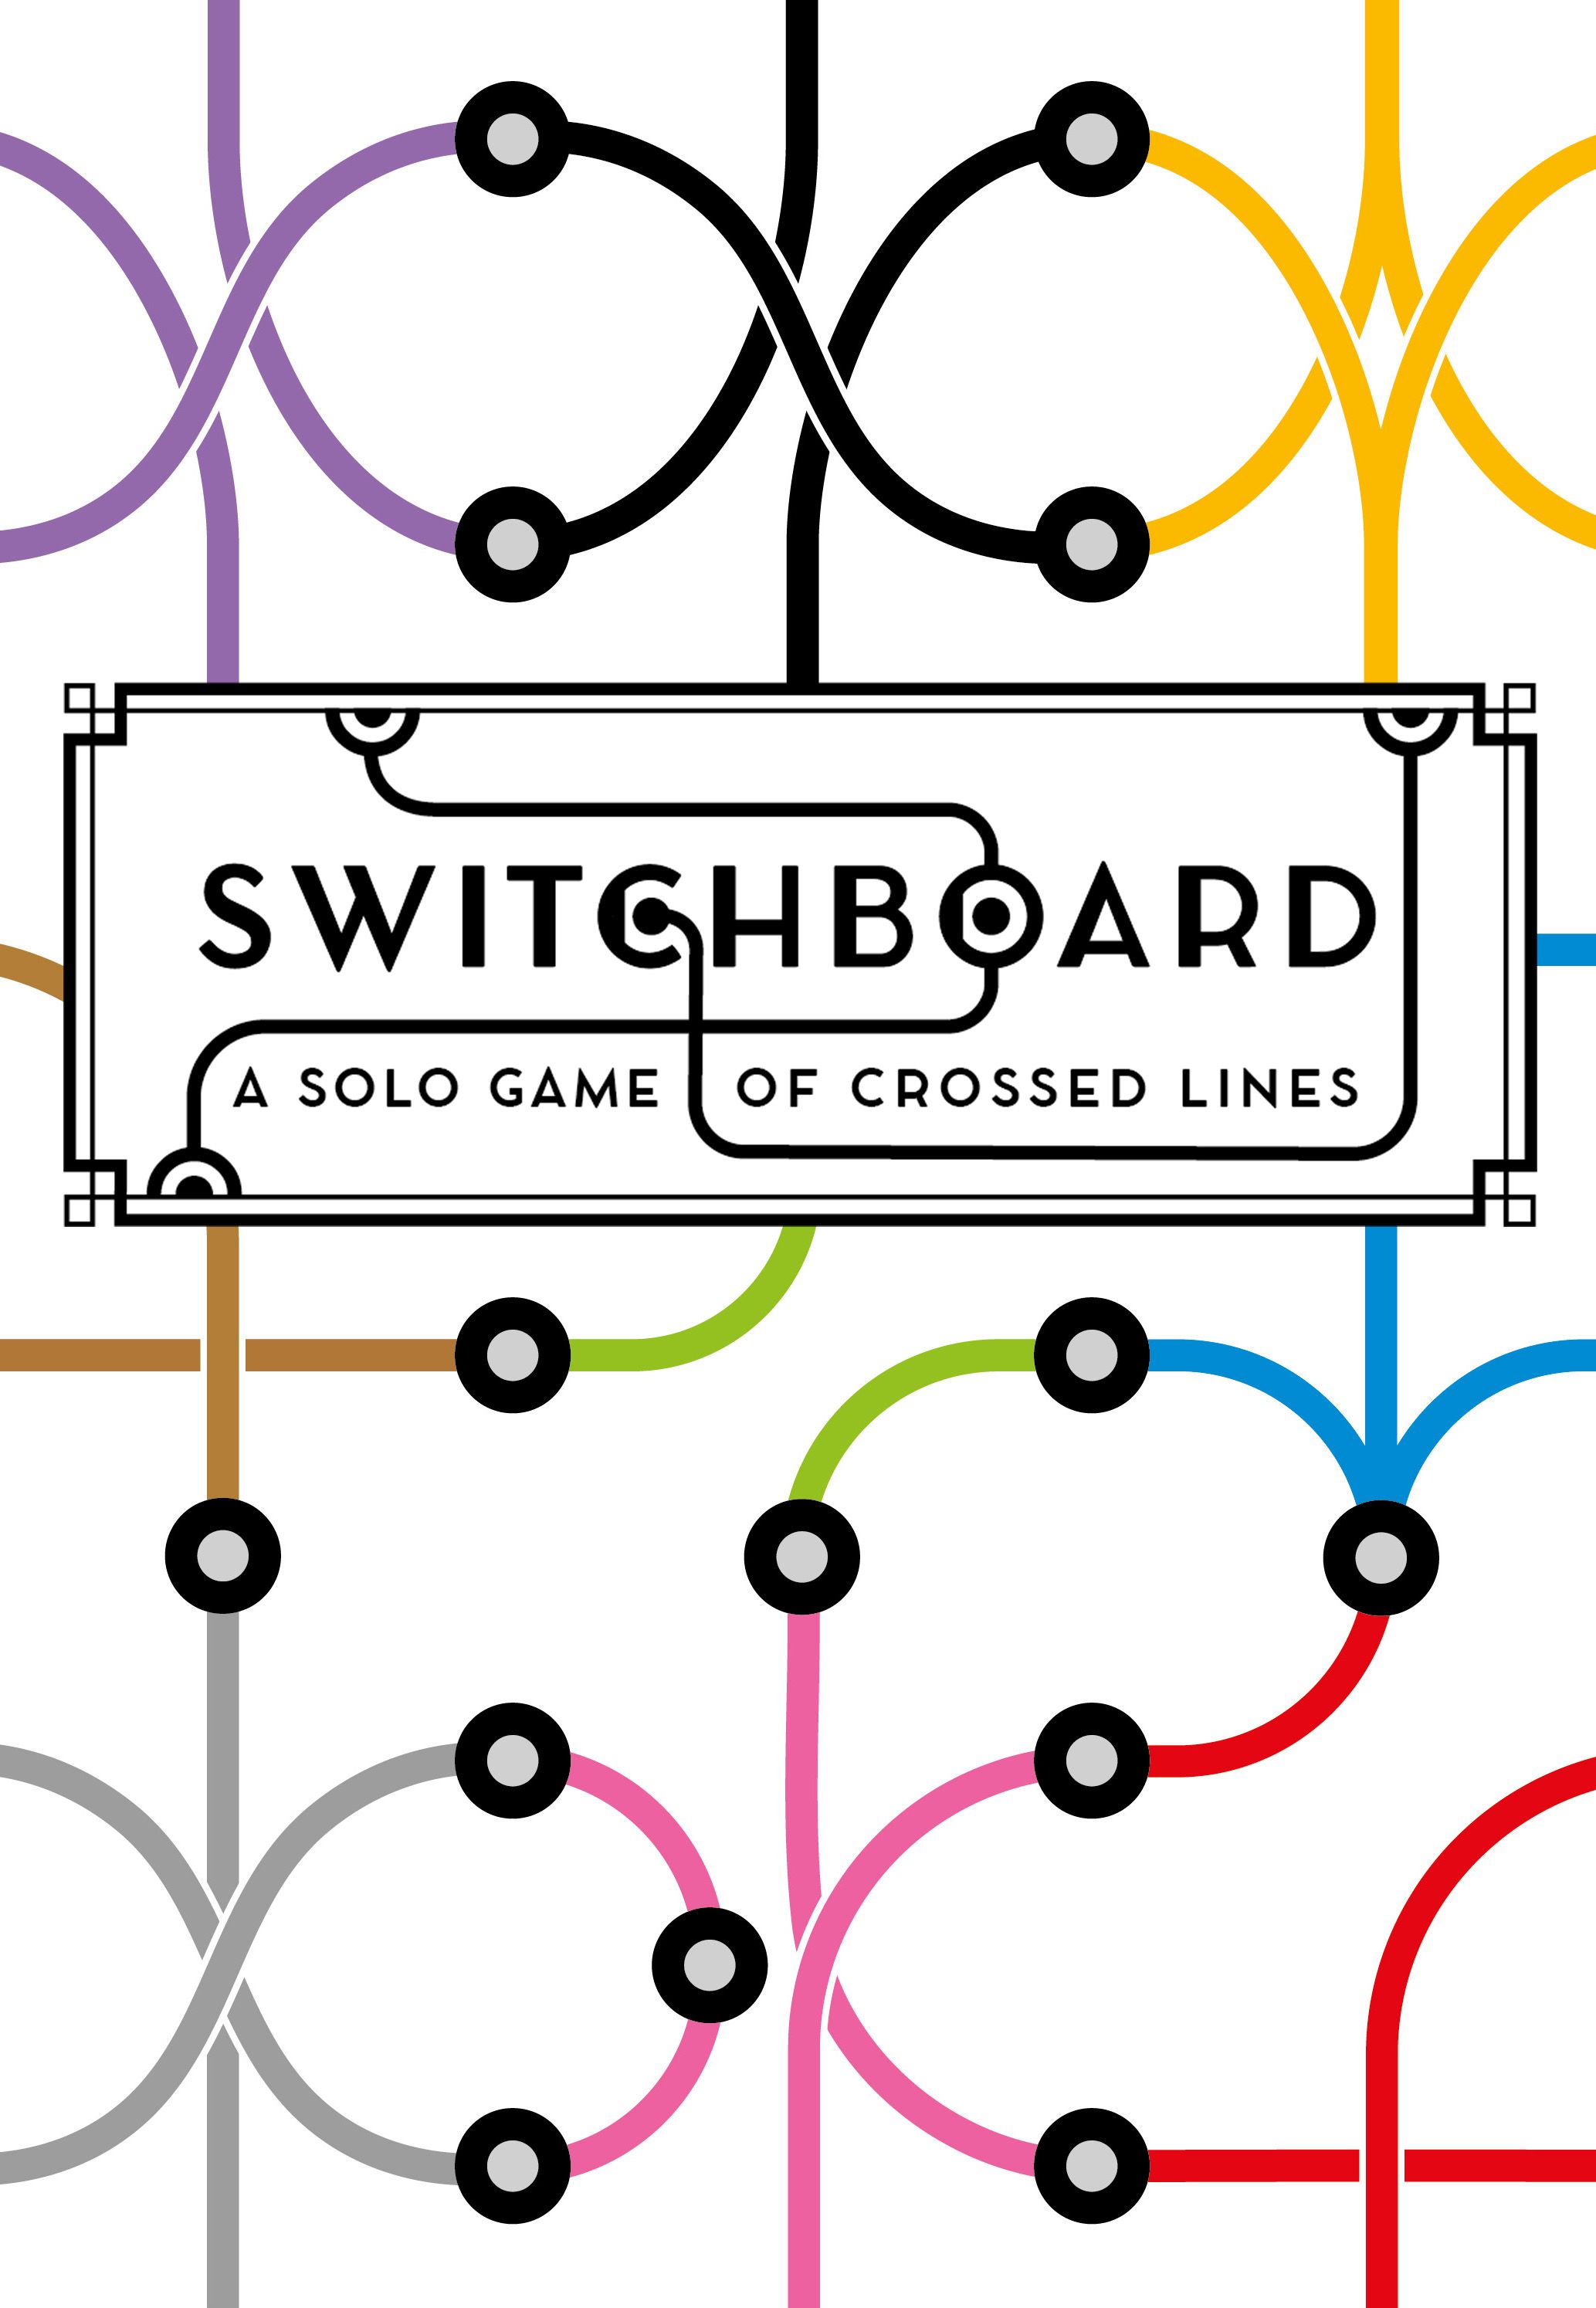 Switchboard: A solo game of crossed lines